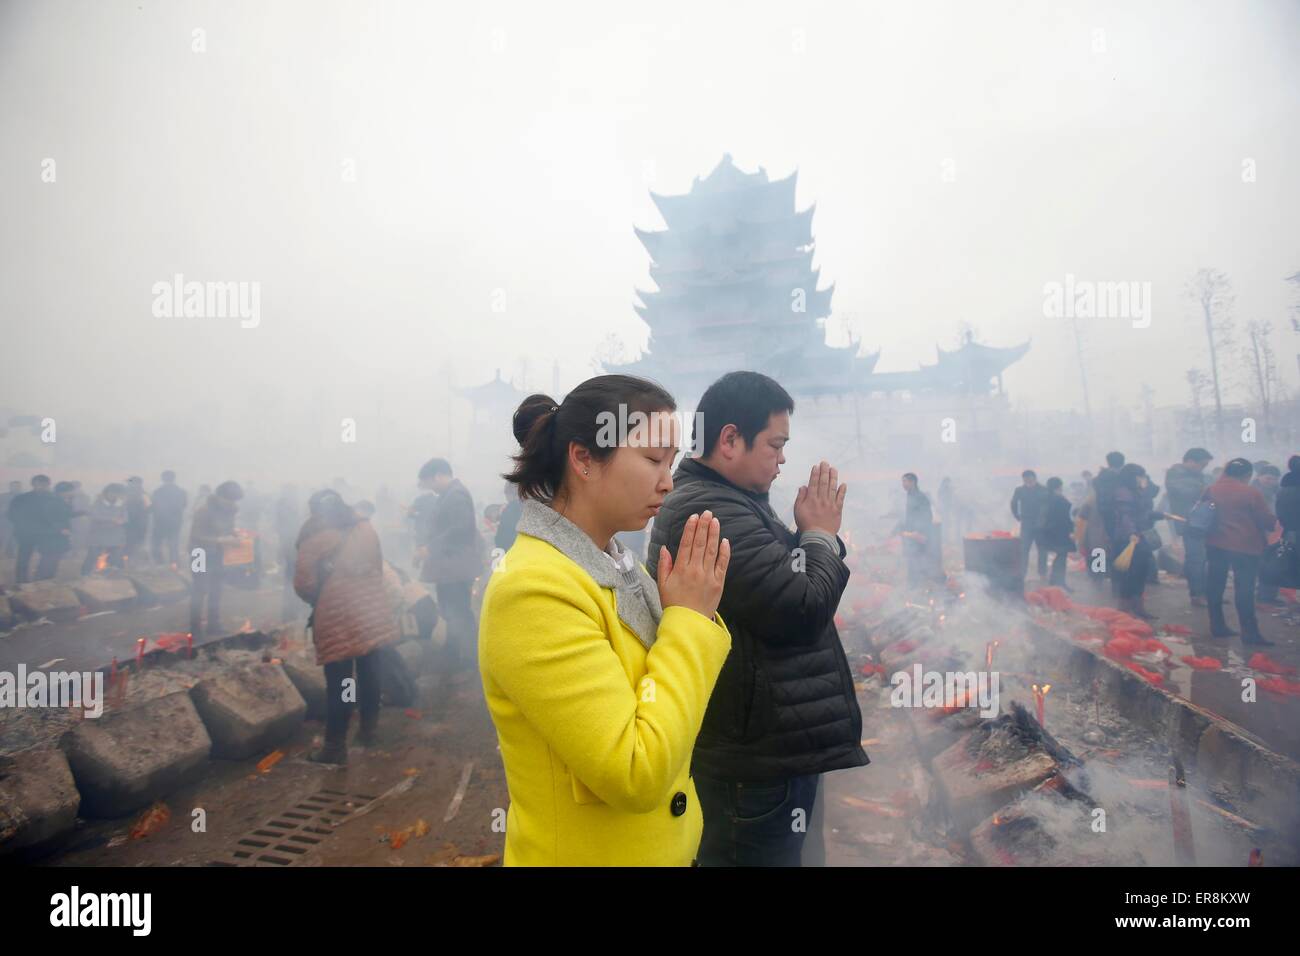 Feb 23, 2015-Wuhan, China- Chinese worshippers  worship at the GuiyuanTemple in the hope that it brings them prosperity and good Stock Photo